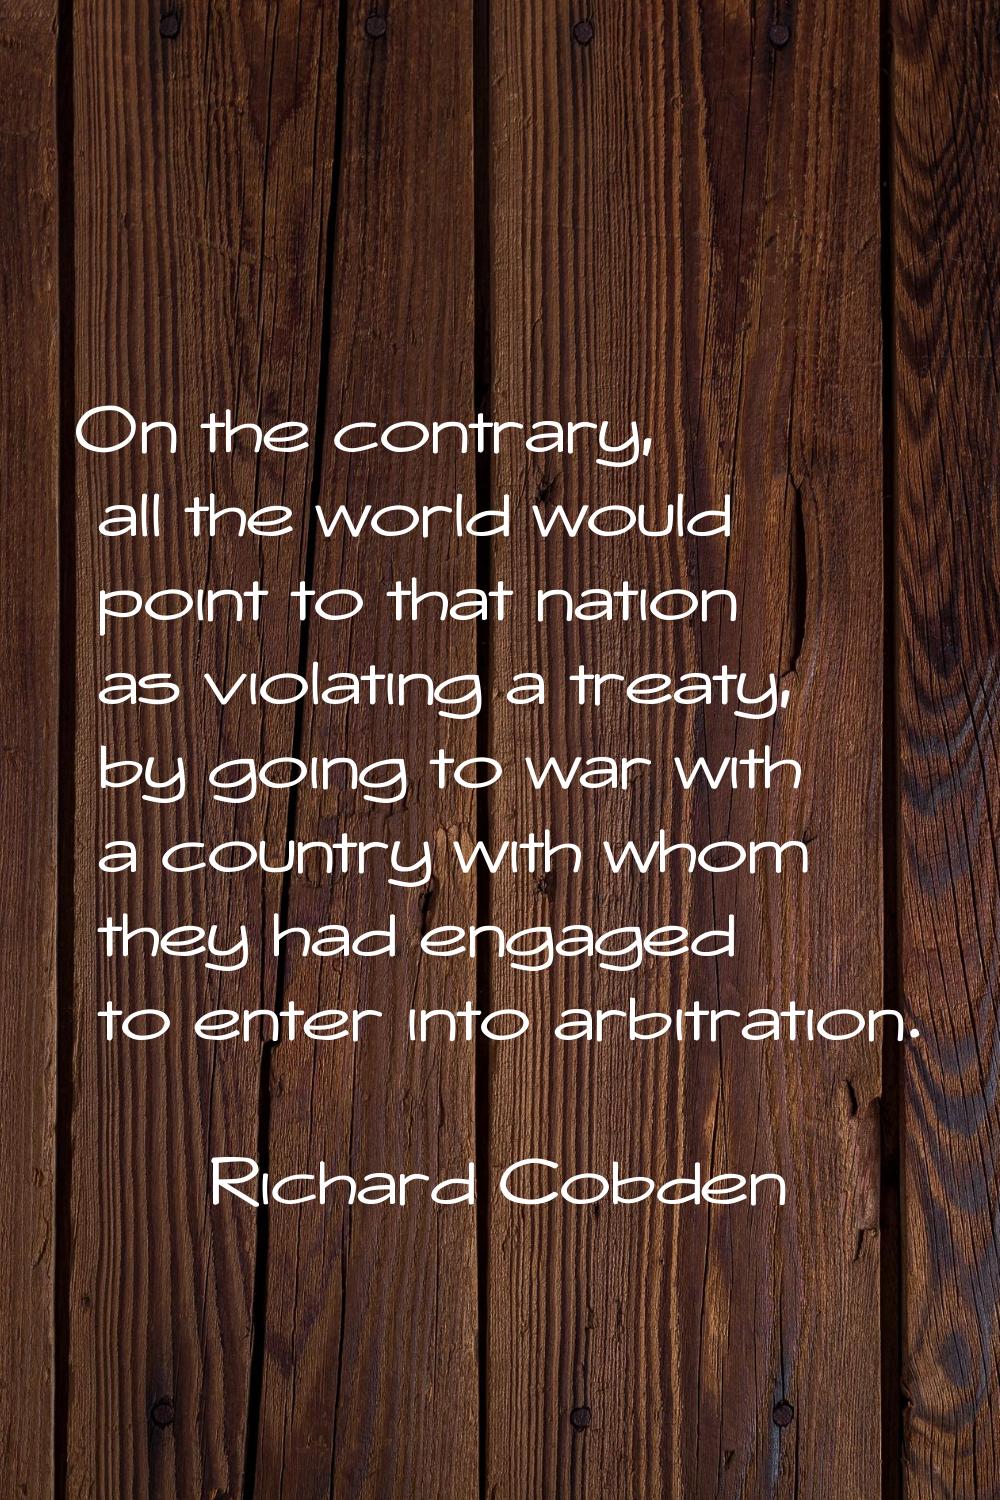 On the contrary, all the world would point to that nation as violating a treaty, by going to war wi